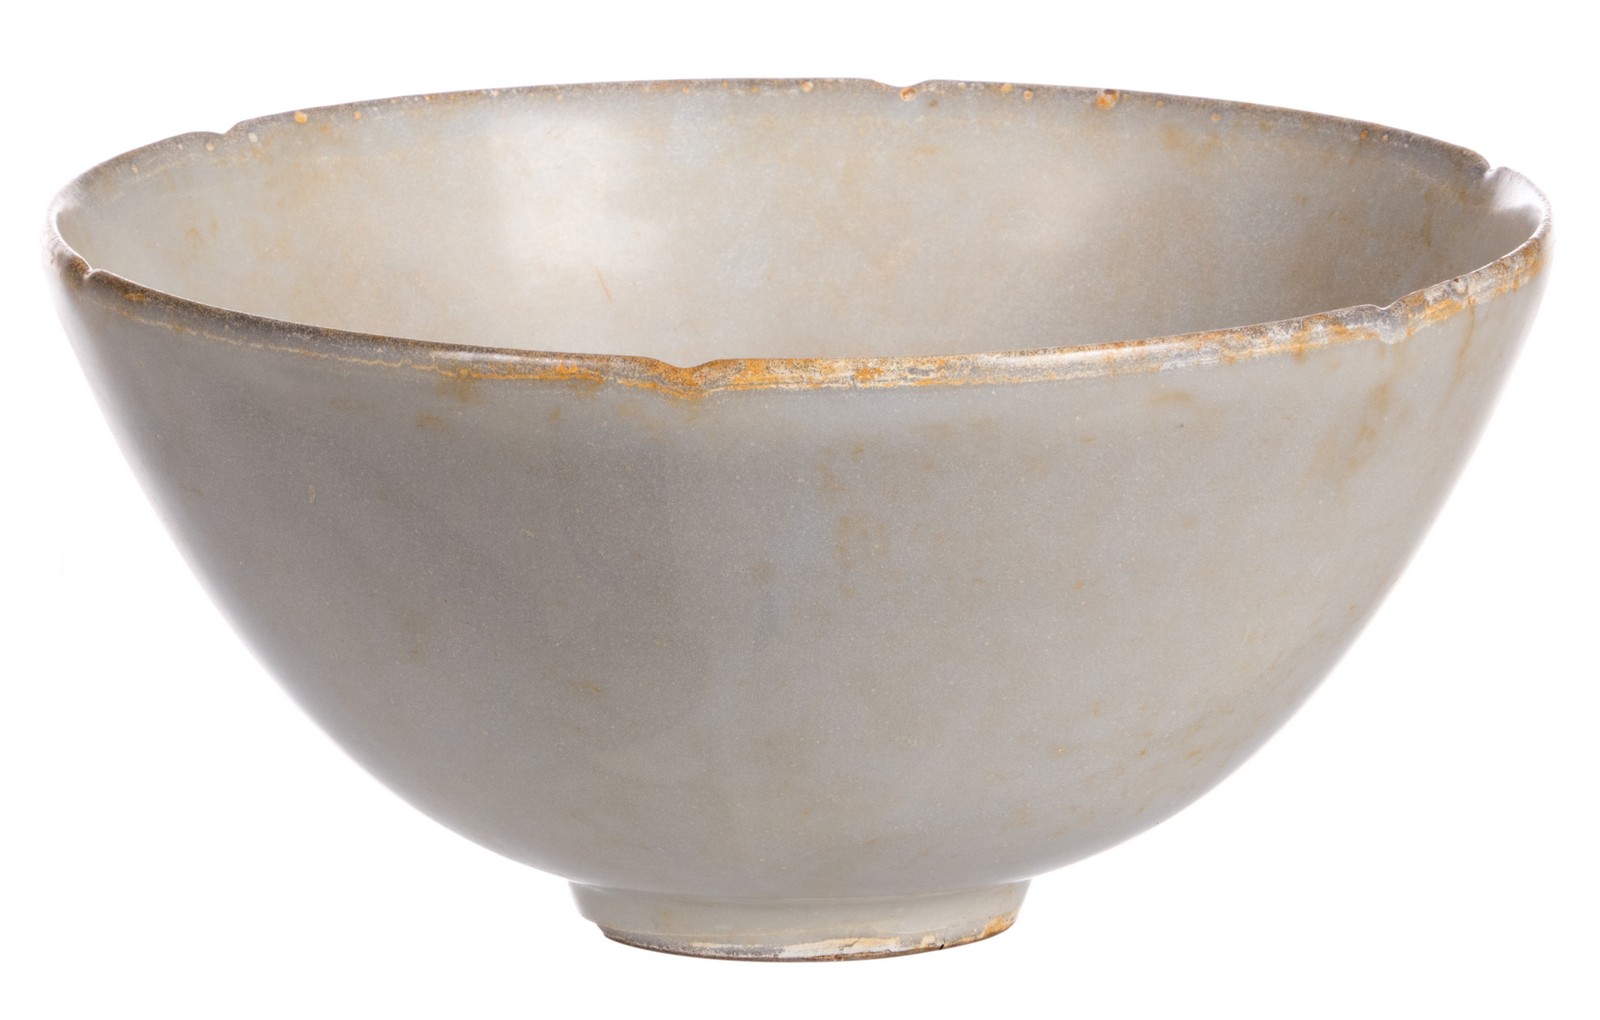 A Chinese celadon stoneware bowl, H 9,5 cm - Diameter 19,5 cm (chips, cracks and firing faults to